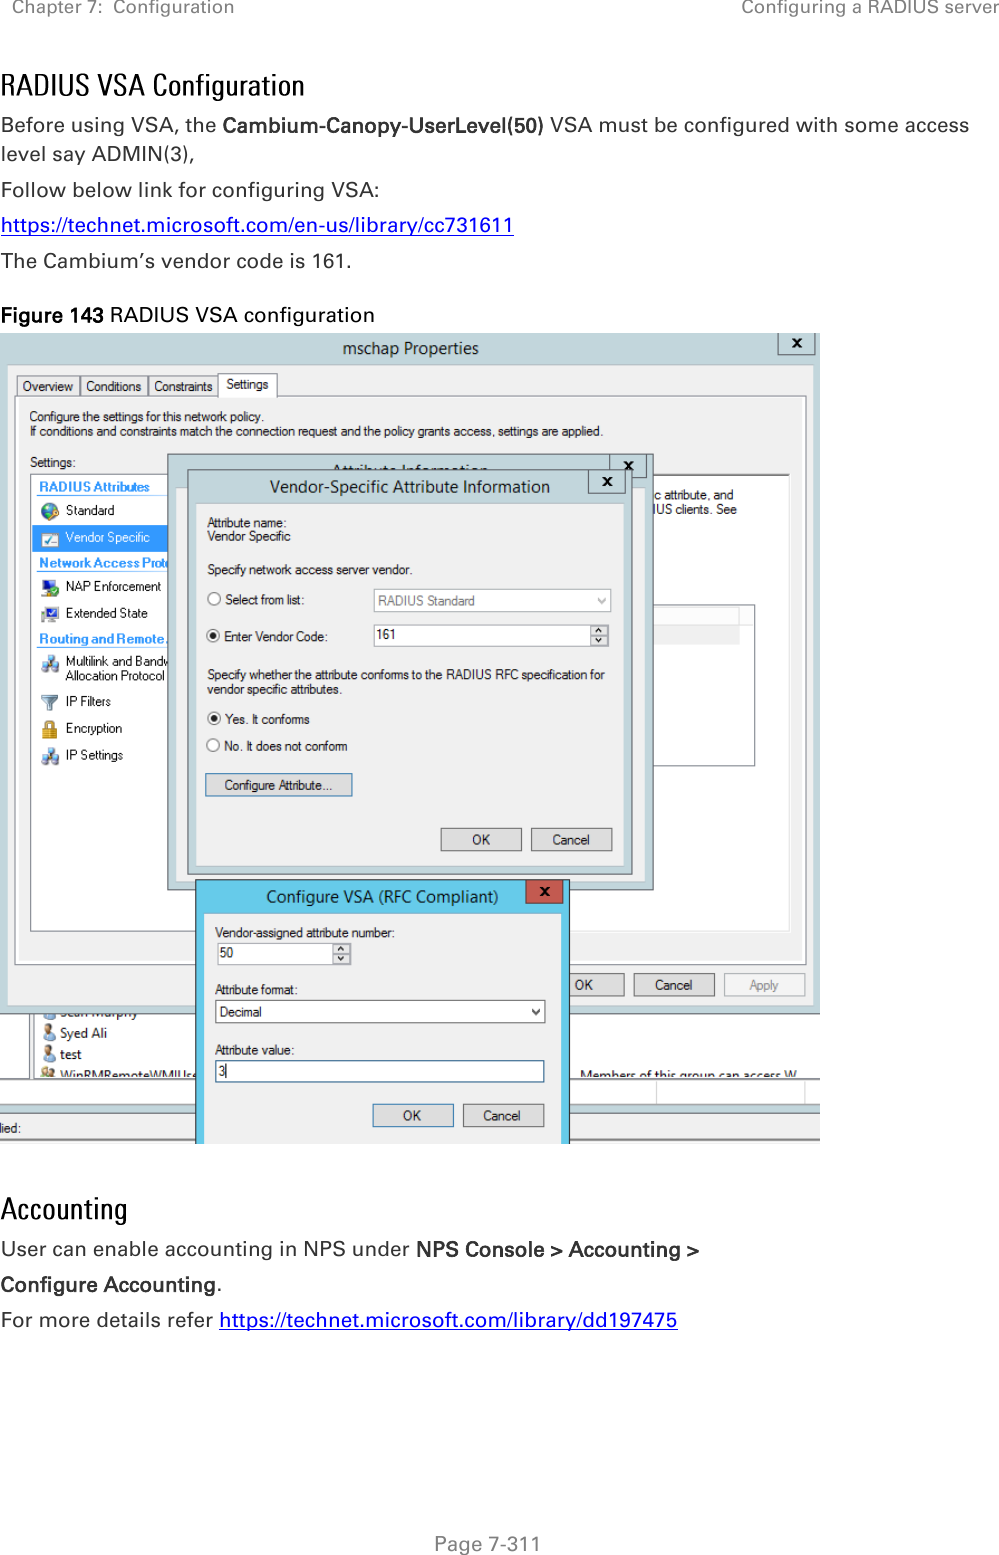 Chapter 7:  Configuration Configuring a RADIUS server   Page 7-311 Before using VSA, the Cambium-Canopy-UserLevel(50) VSA must be configured with some access level say ADMIN(3),  Follow below link for configuring VSA: https://technet.microsoft.com/en-us/library/cc731611  The Cambium’s vendor code is 161. Figure 143 RADIUS VSA configuration   User can enable accounting in NPS under NPS Console &gt; Accounting &gt;  Configure Accounting. For more details refer https://technet.microsoft.com/library/dd197475    